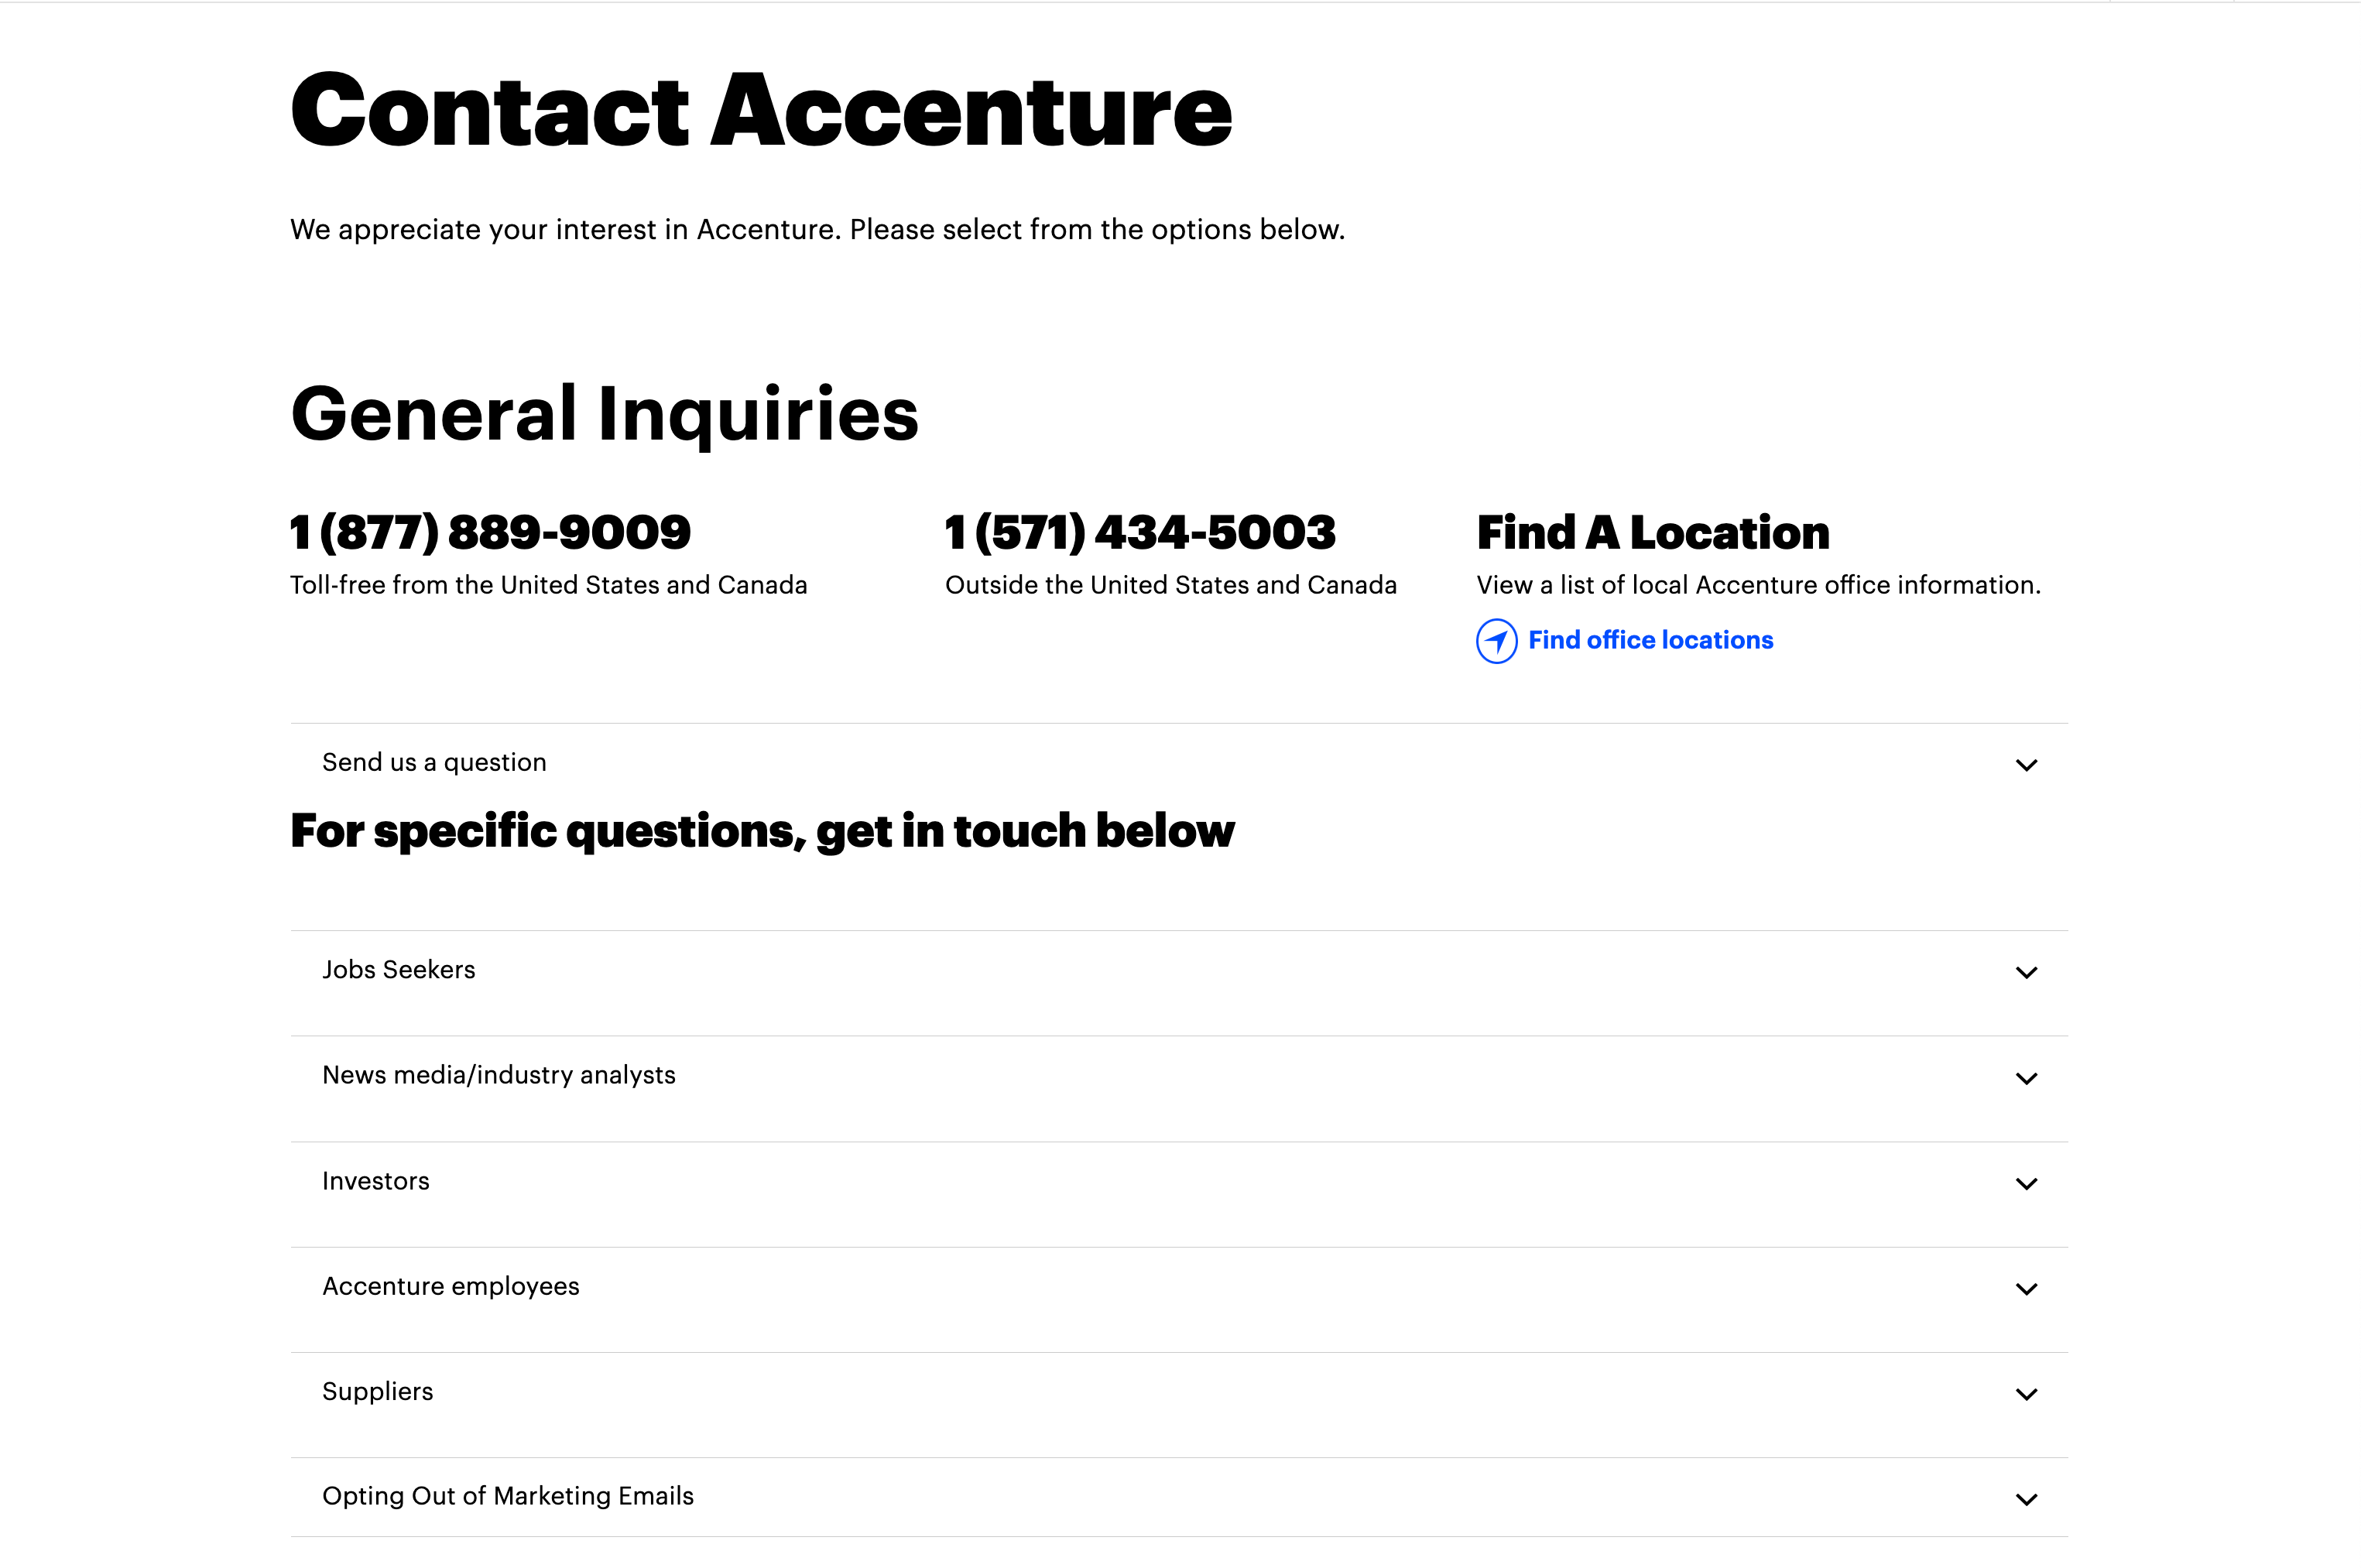 Accenture's contact us page